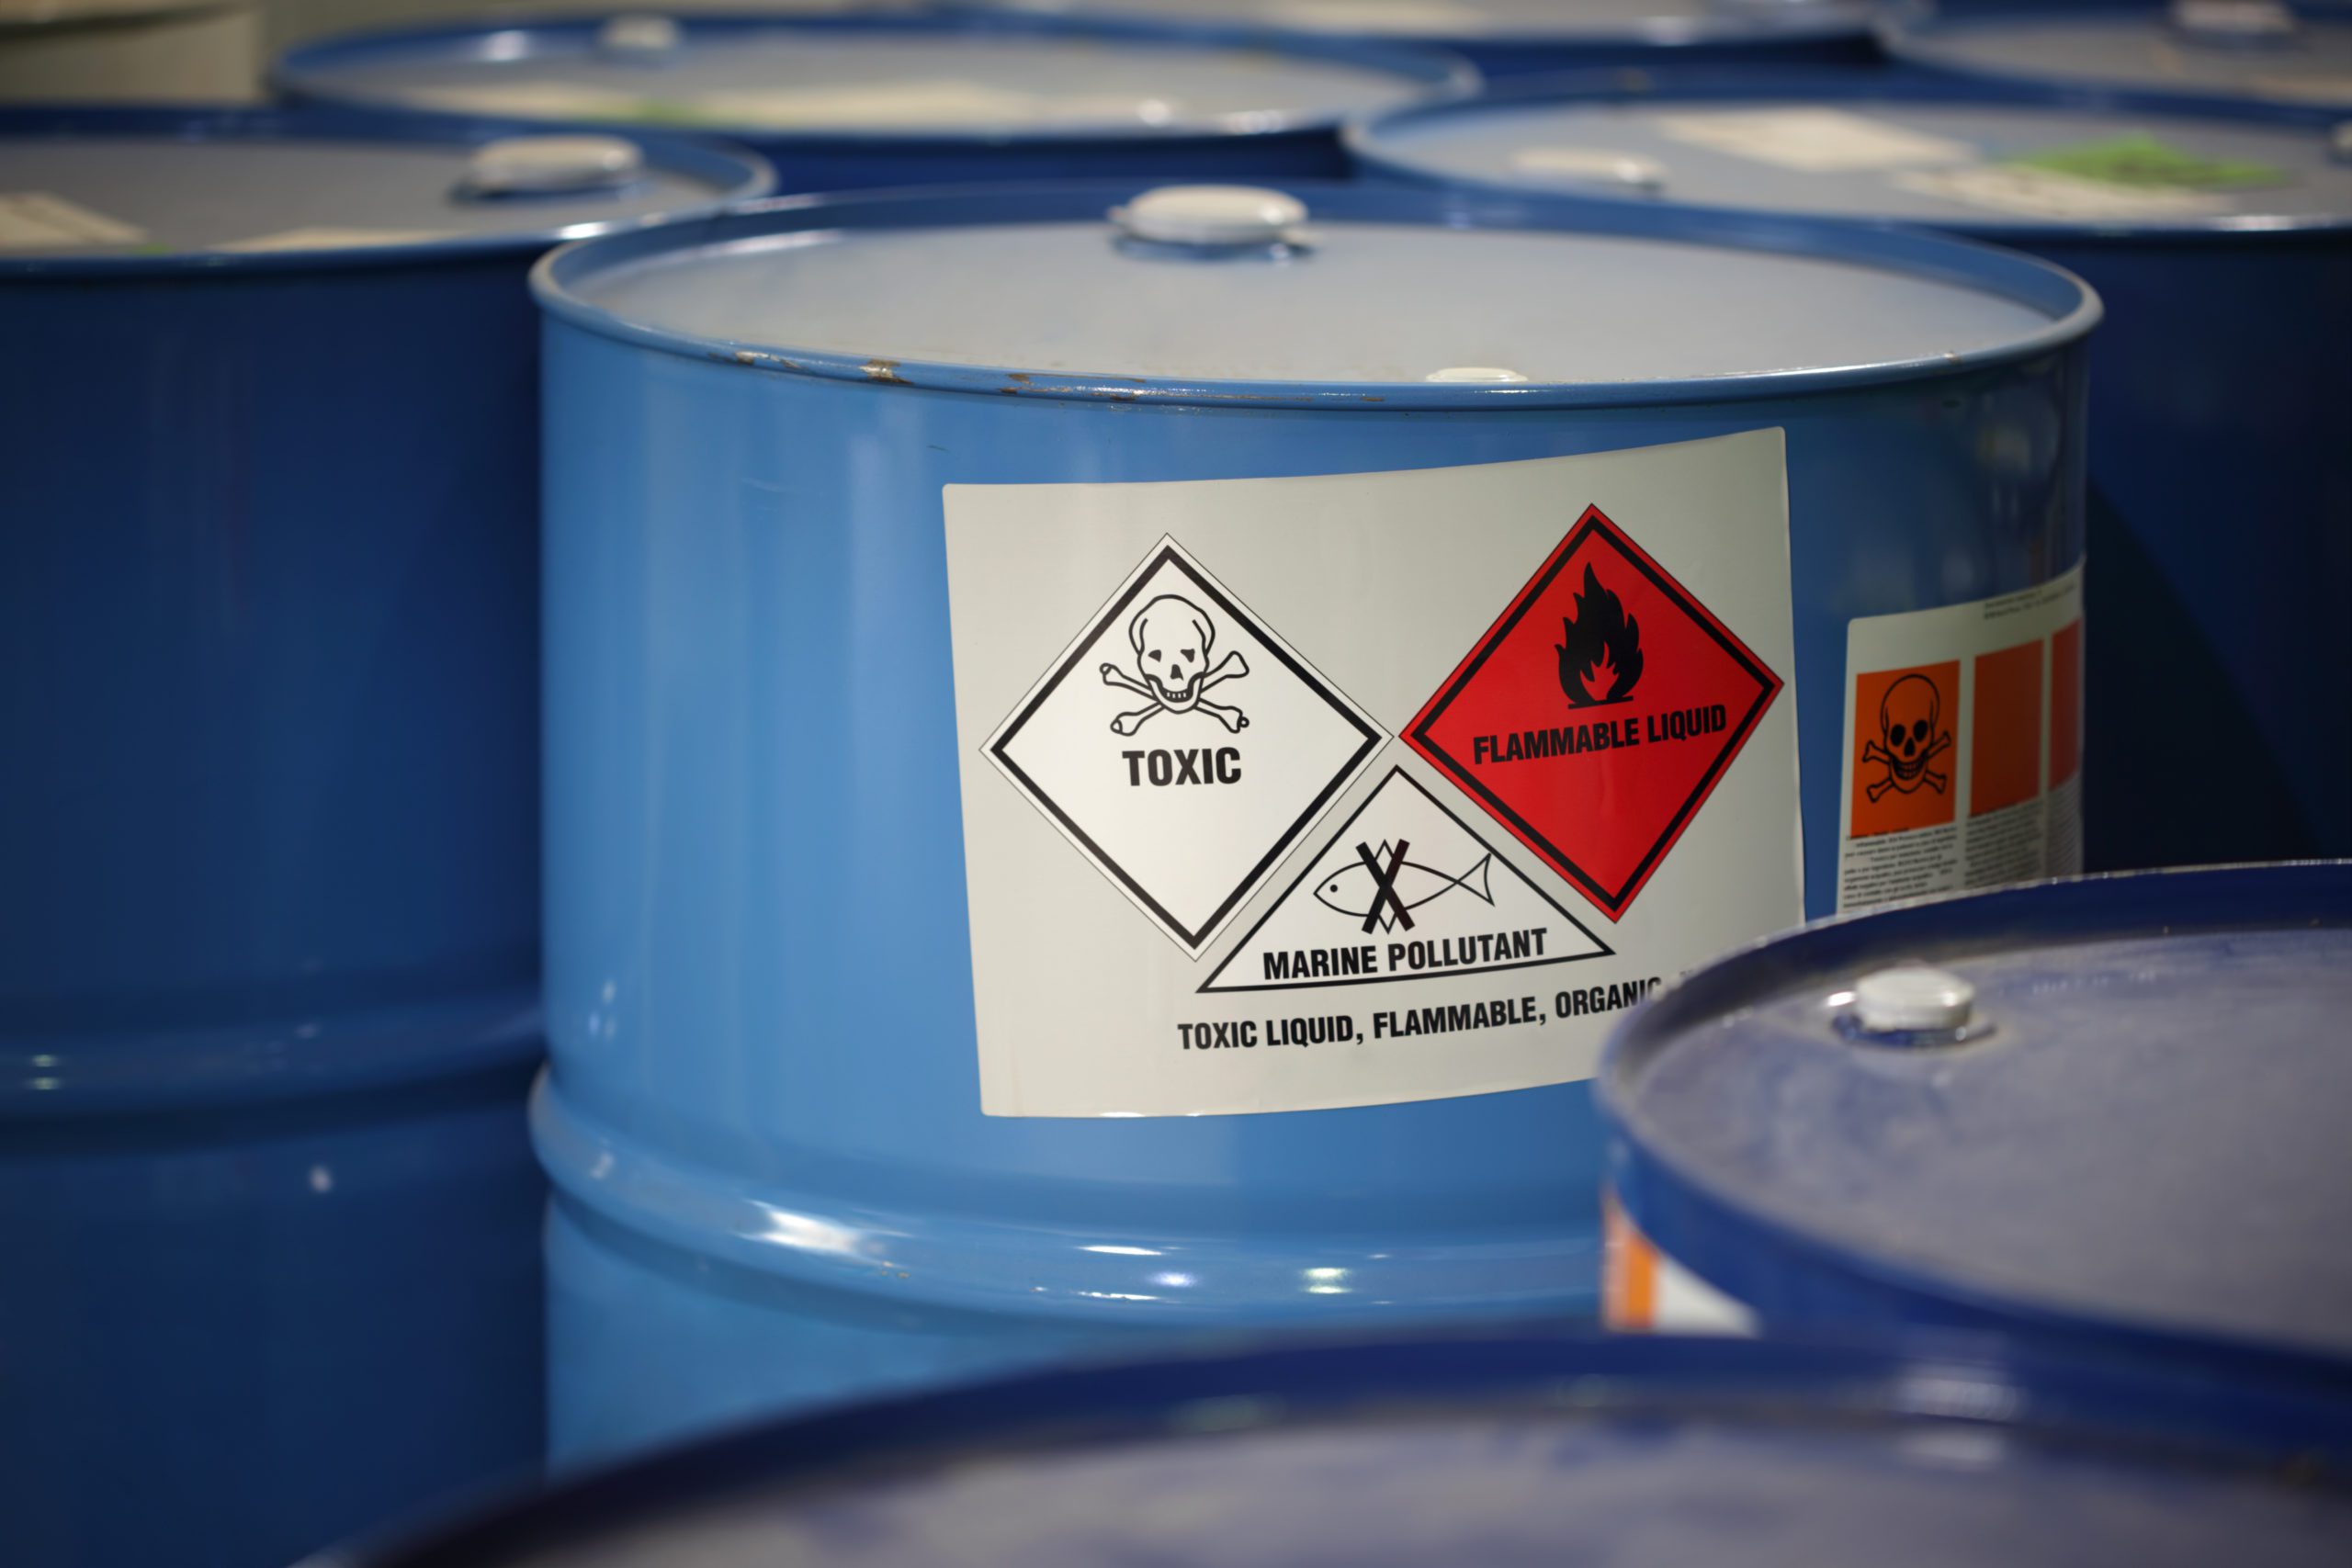 Image of a blue waste bin with toxic substance labels